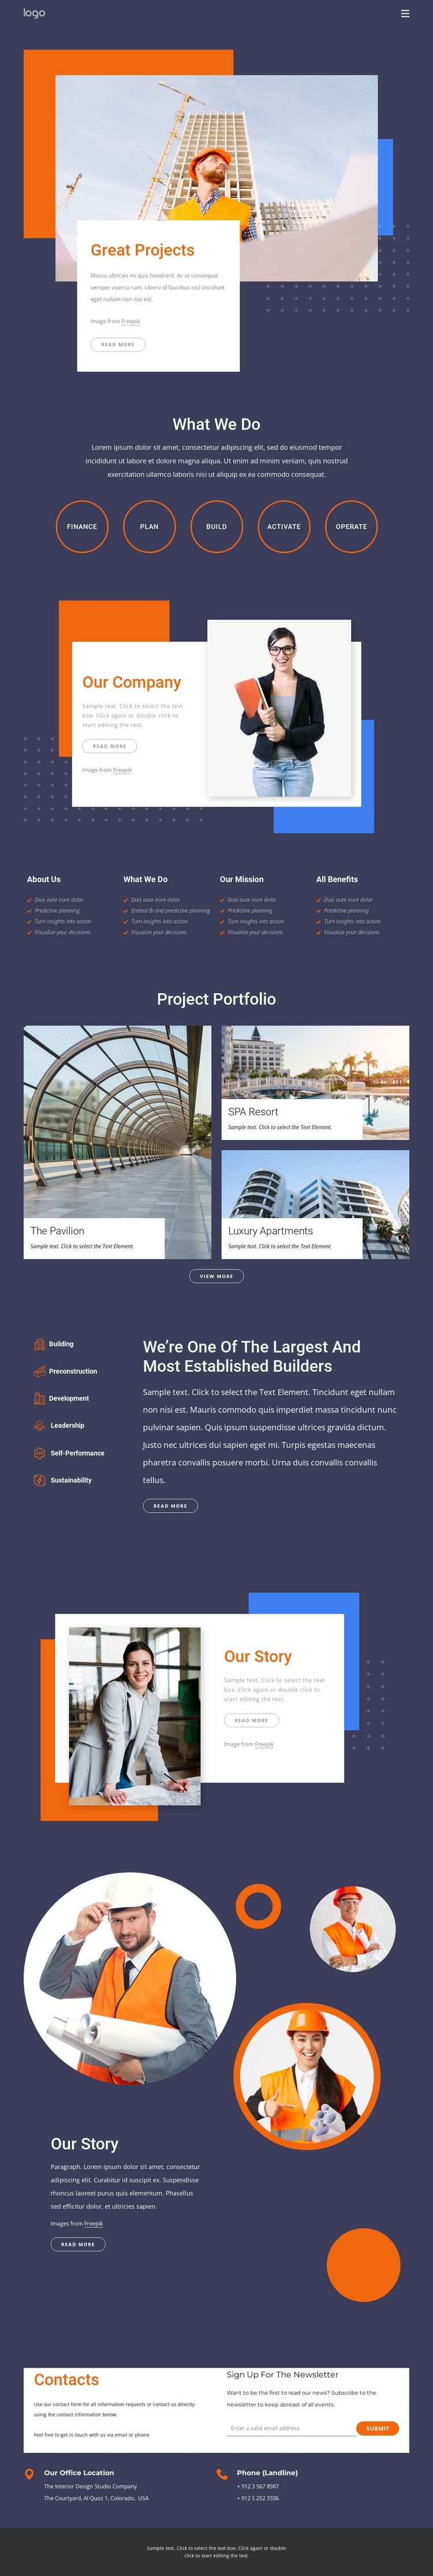 We specialise in delivering large complex building projects WordPress Theme